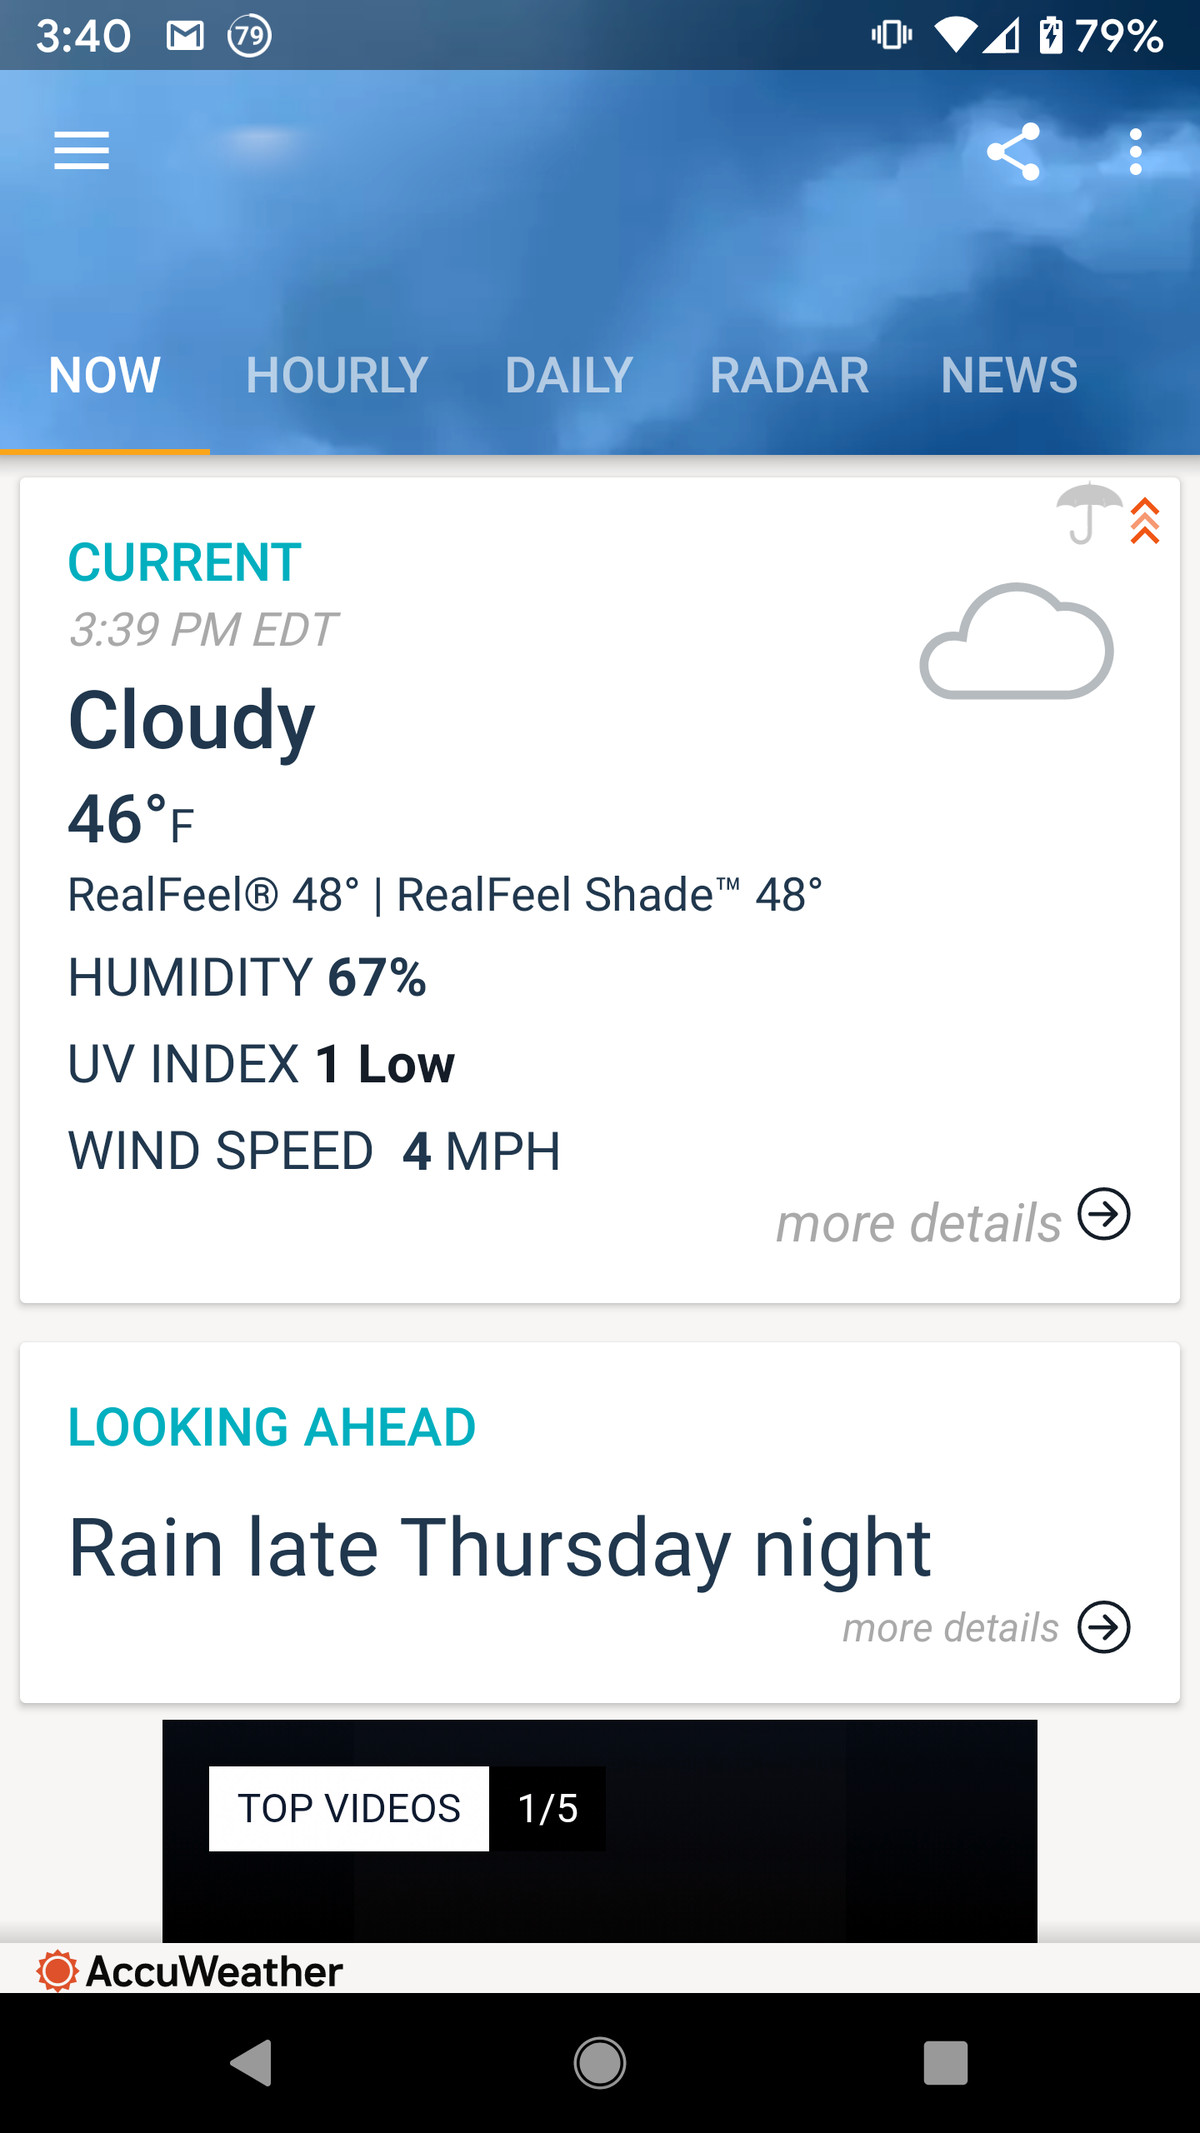 AccuWeather’s app has an easily understood interface.